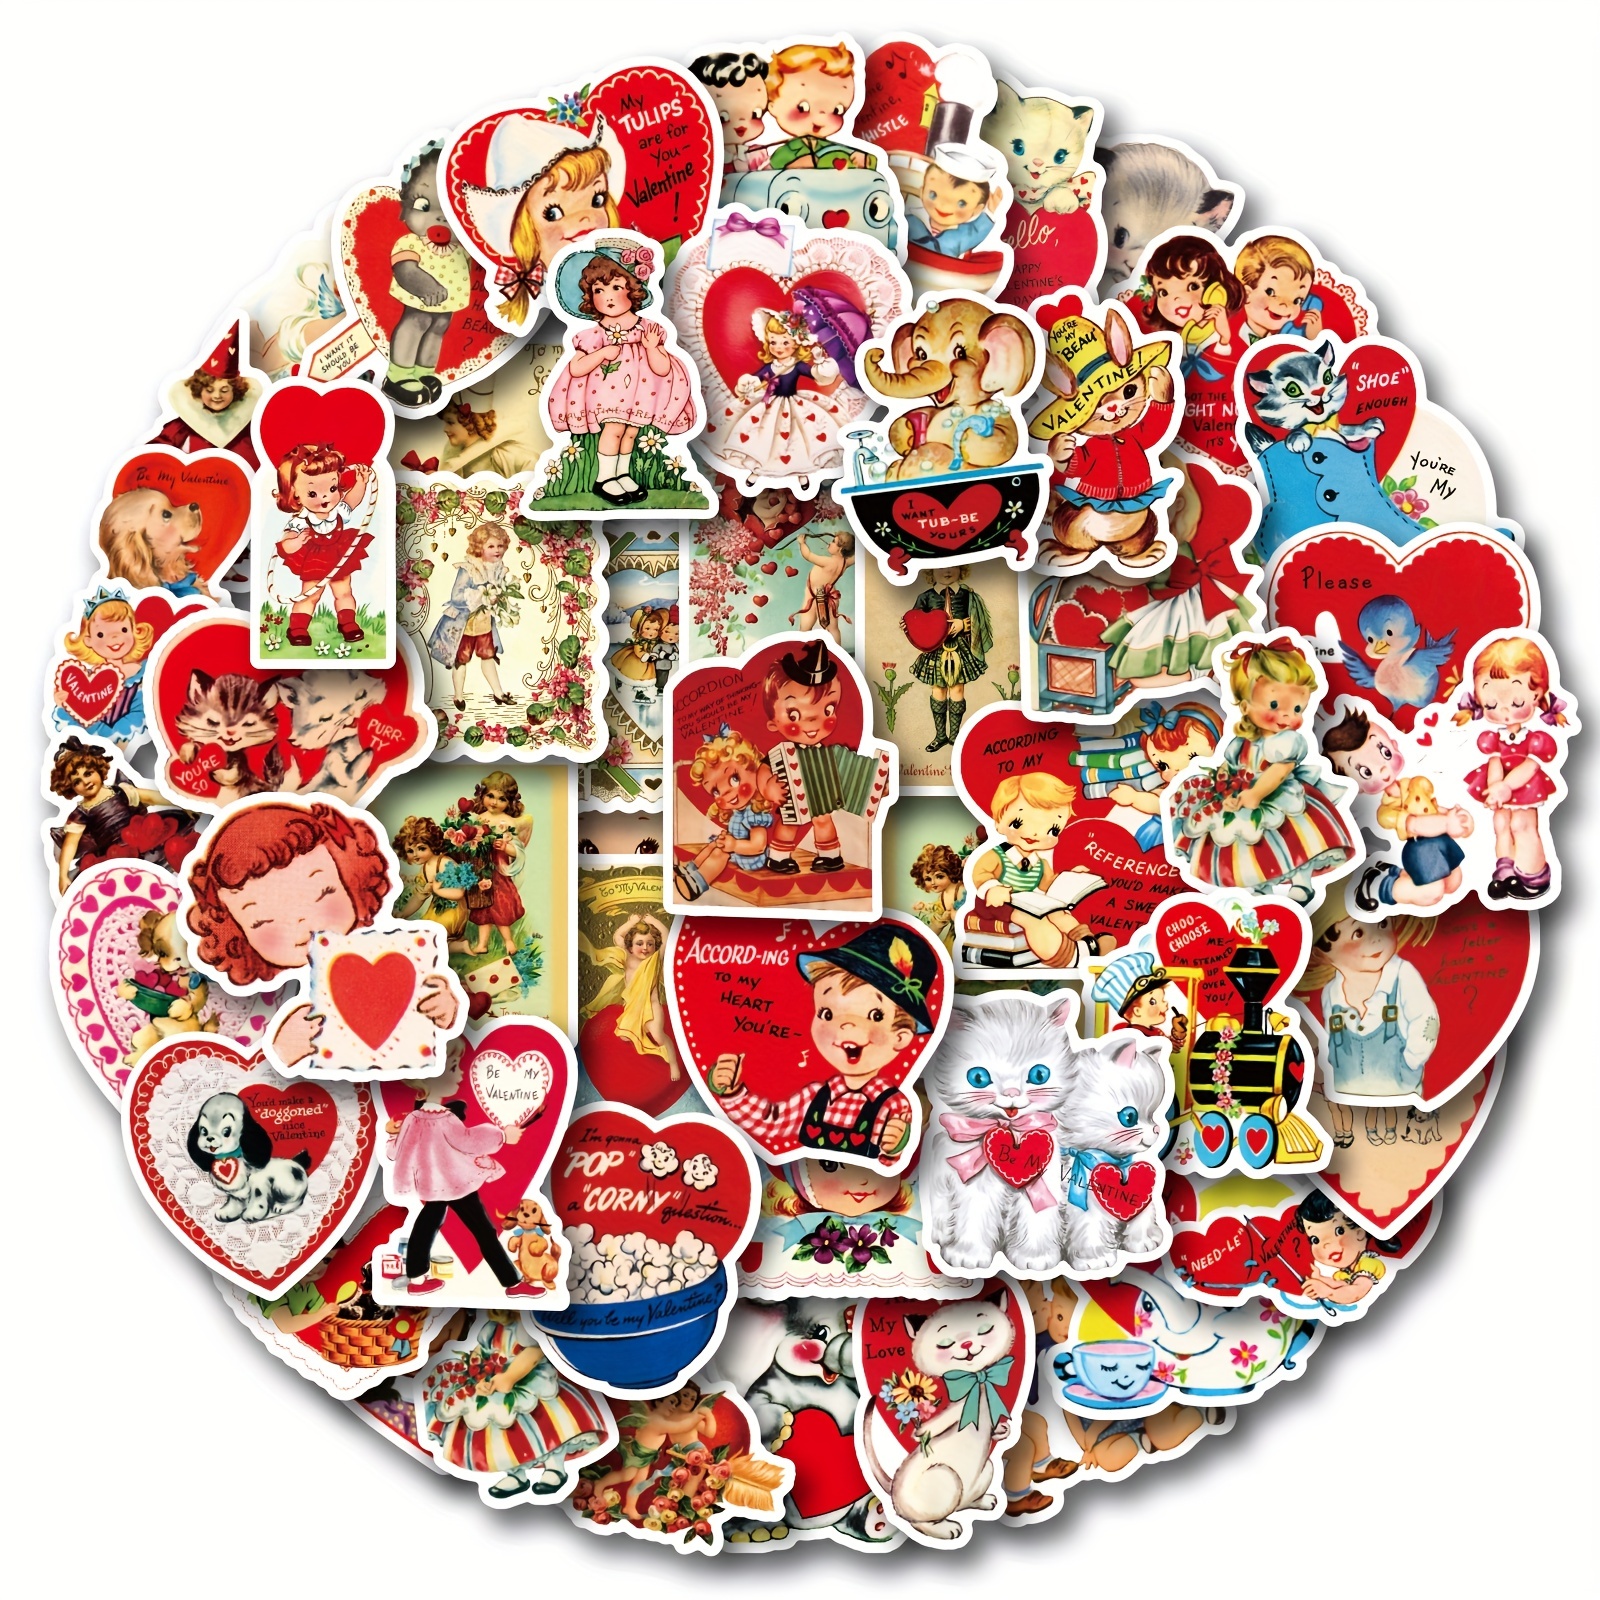  500 Pcs Mexico Aesthetic Graffiti Round Seal Label  Self-Adhesive Stickers for Christmas Halloween Party Decorations for Kid  Teen Girl Boy for Scrapbooking Envelopes Water Bottles(Fashion Pattern 10)  : Toys & Games